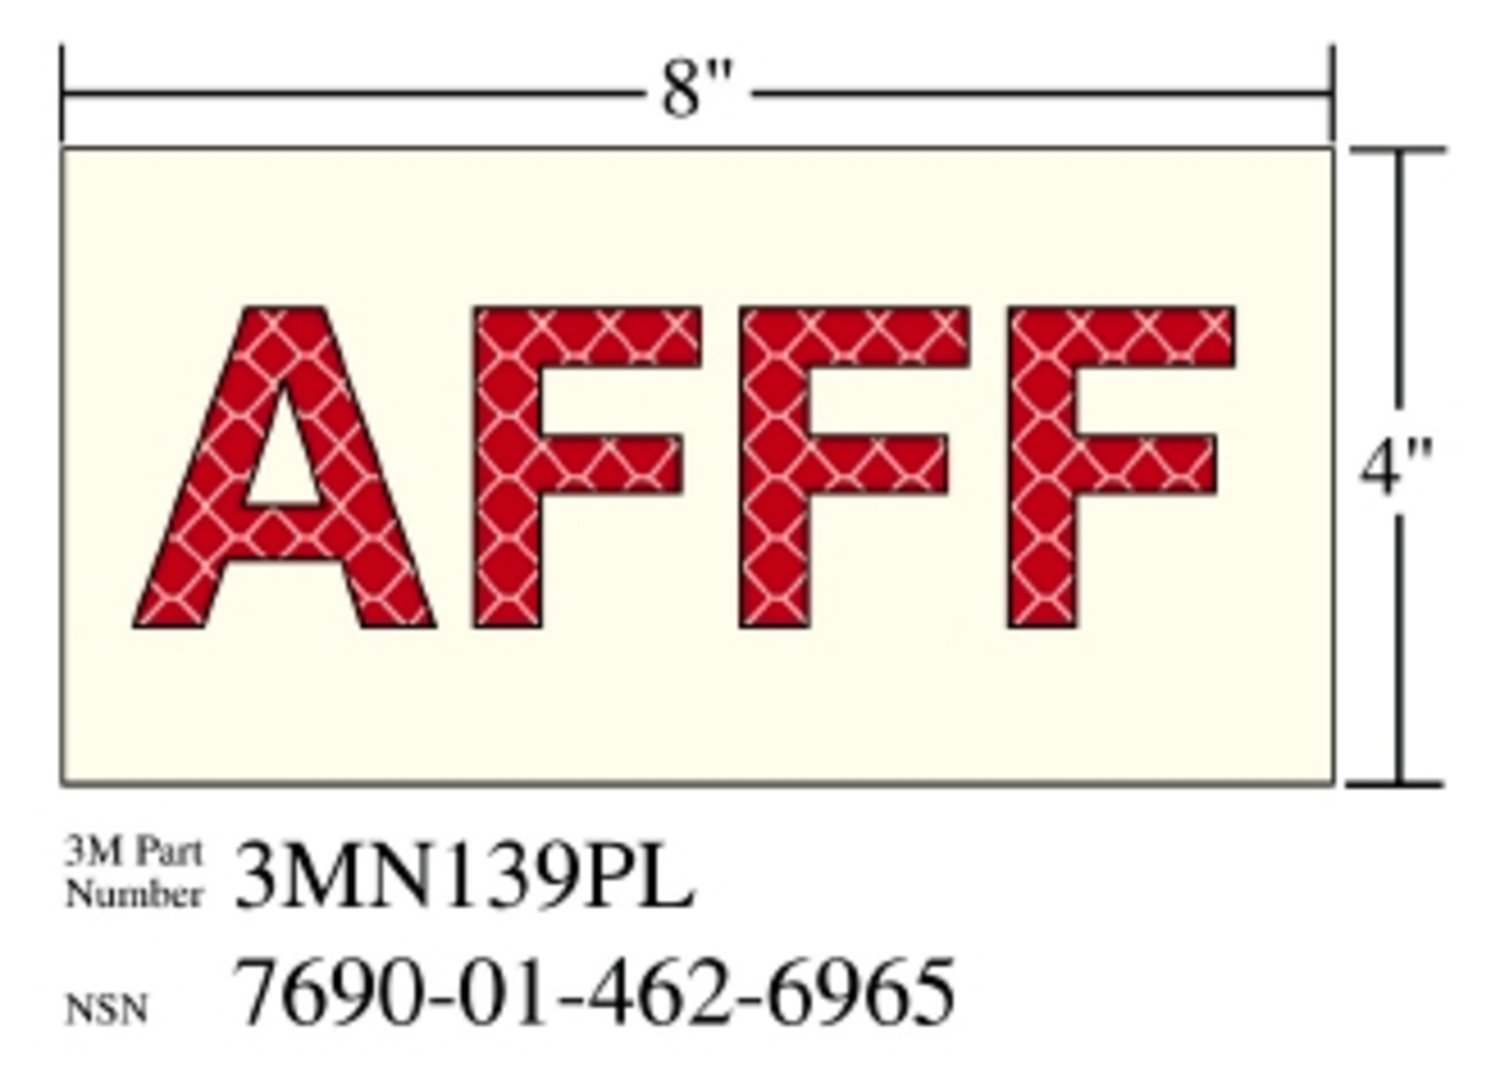 7010389824 - 3M Photoluminescent Film 6900, Shipboard Sign 3MN139PL, 8 in x 4 in,
AFFF, 10/Package